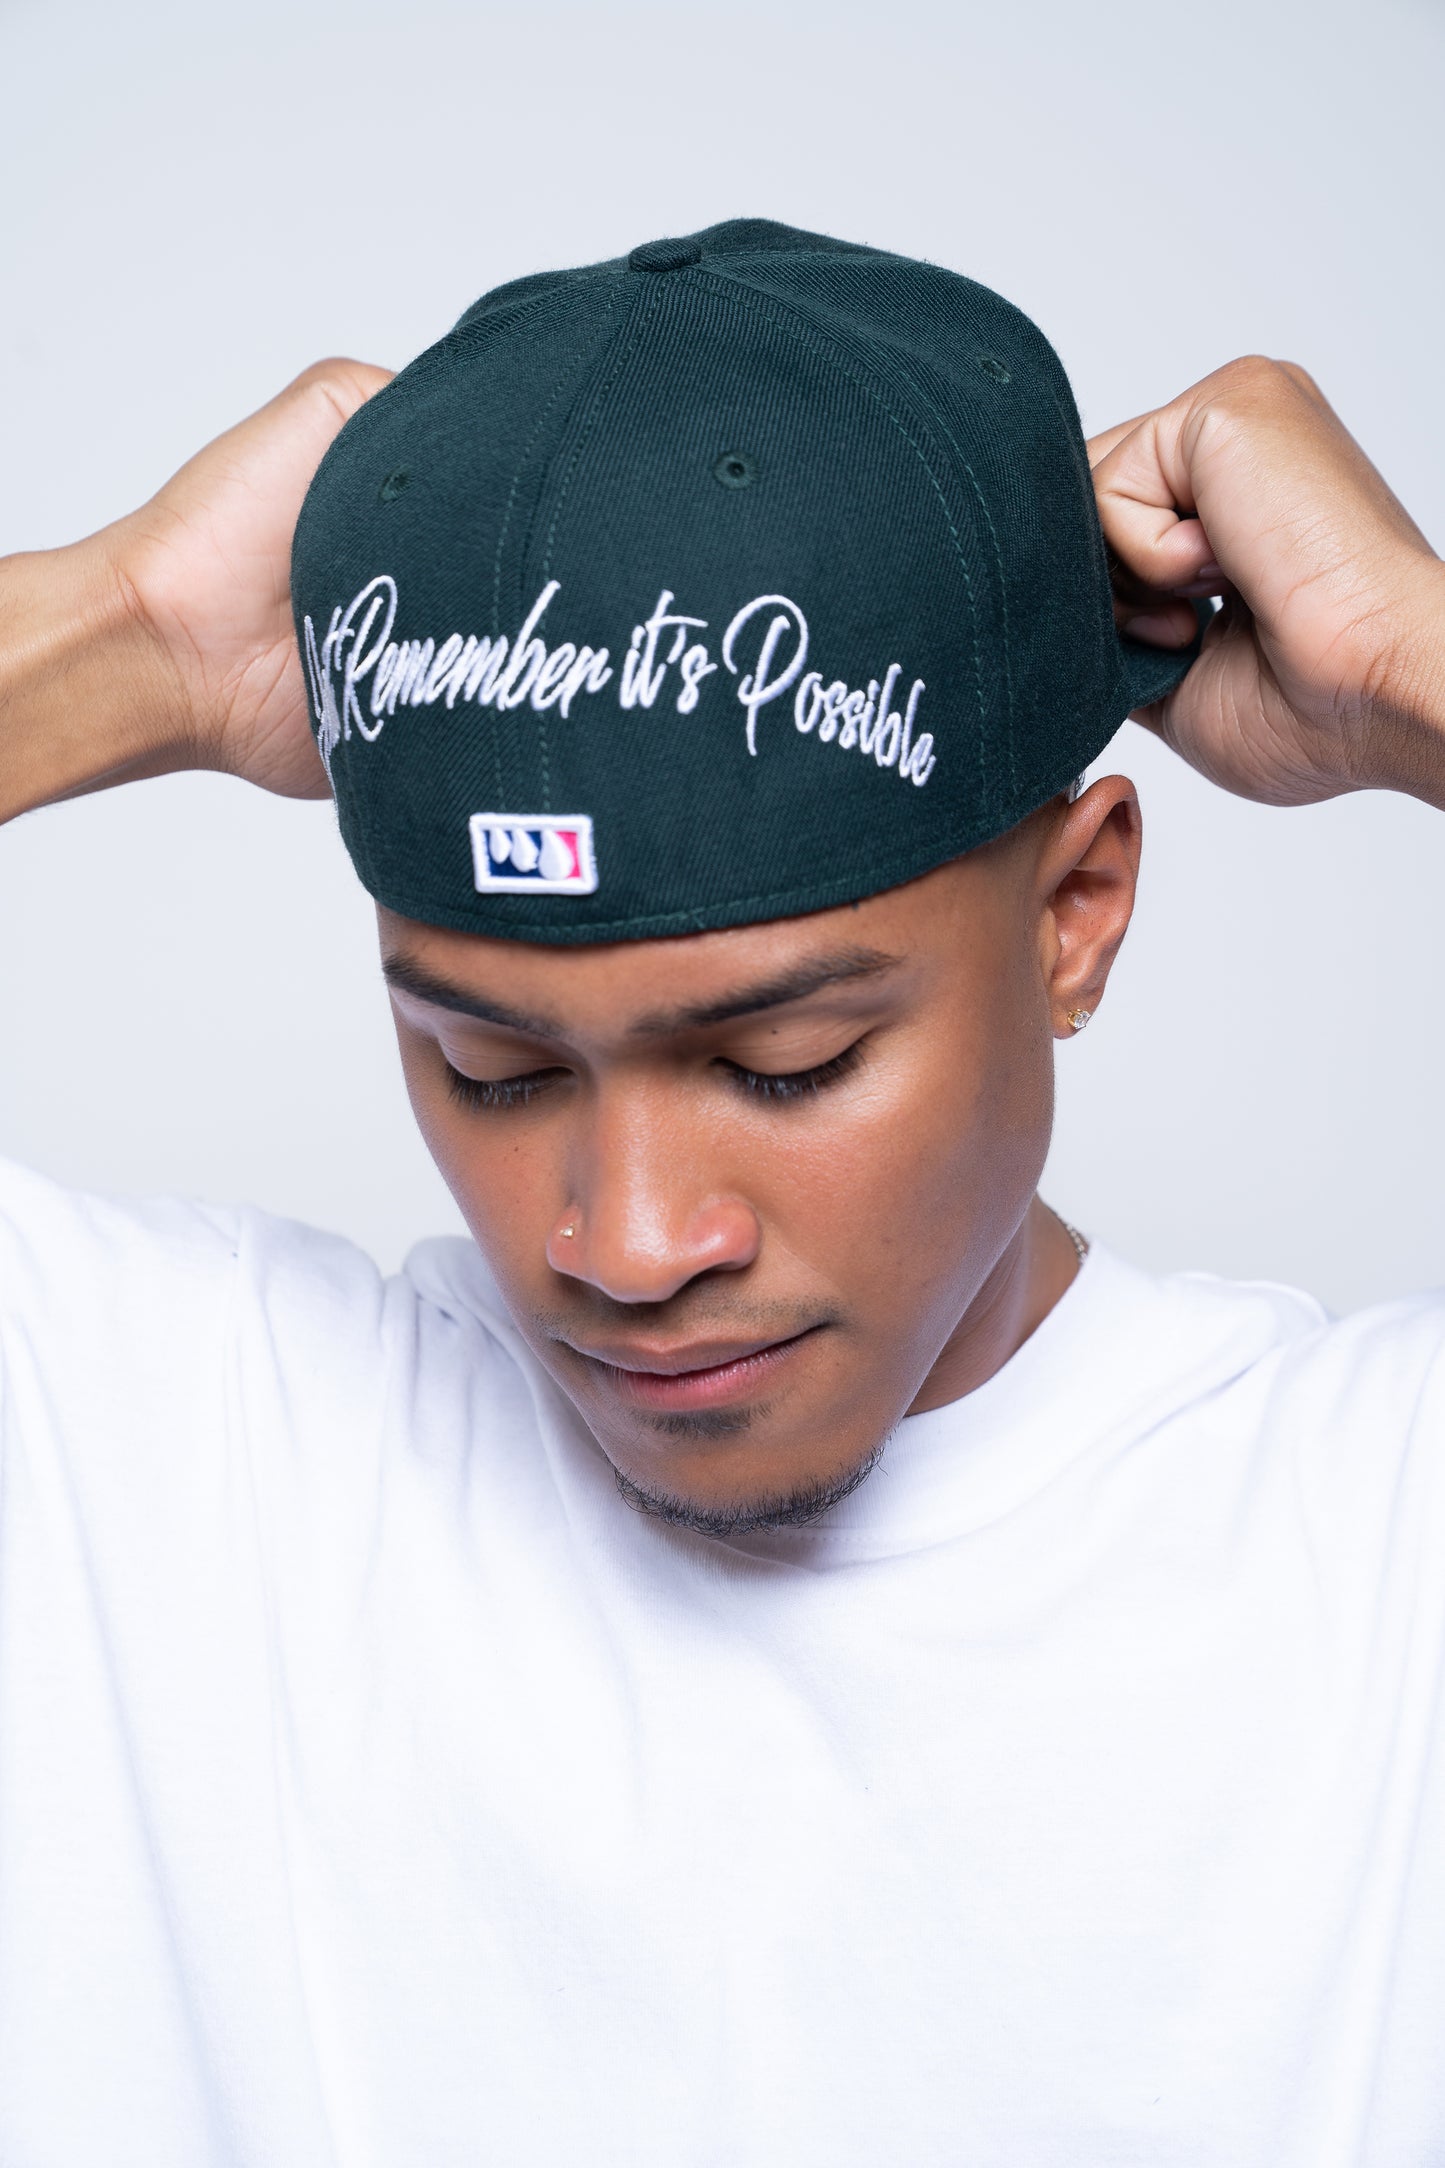 CLASSIC LA FITTED HAT (GREEN)